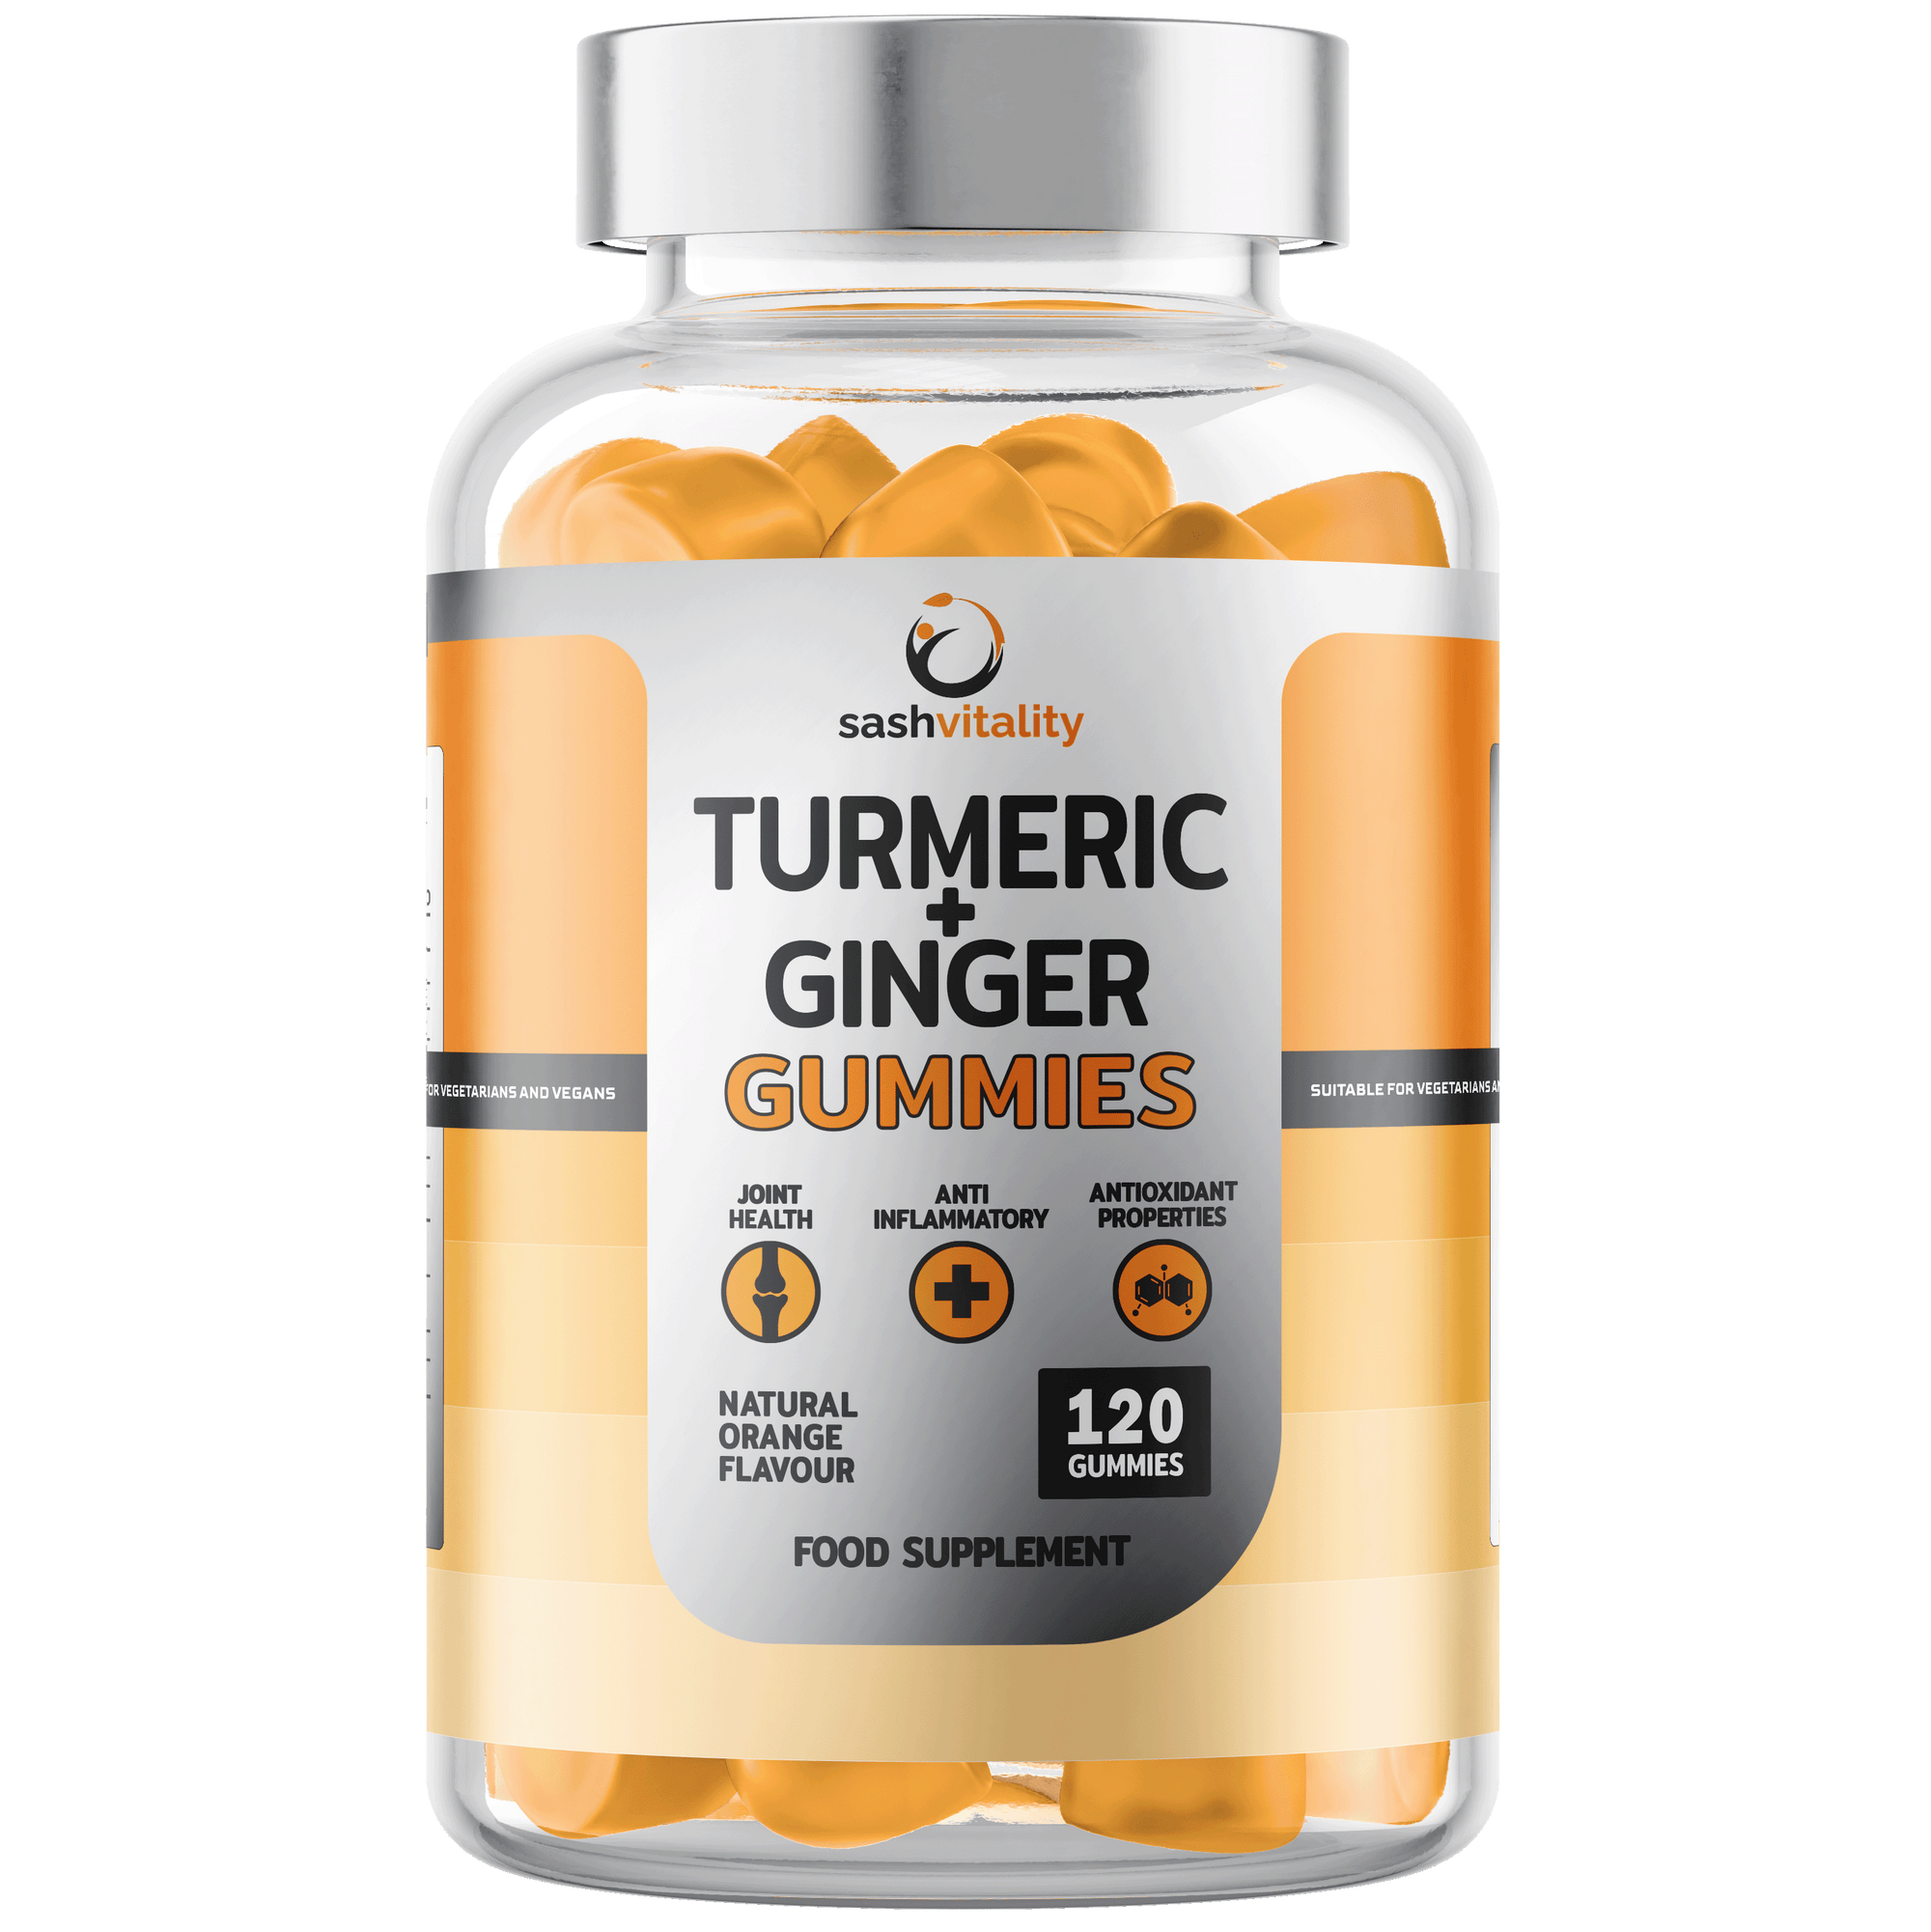 Turmeric and Ginger Gummies - 120 Gummies - High Potency Antioxidant & Absorption – Anti-Inflammatory - Joint Health Support - Helps Pain Relief - UK Made Sash Vitality (Natural Orange Flavour)